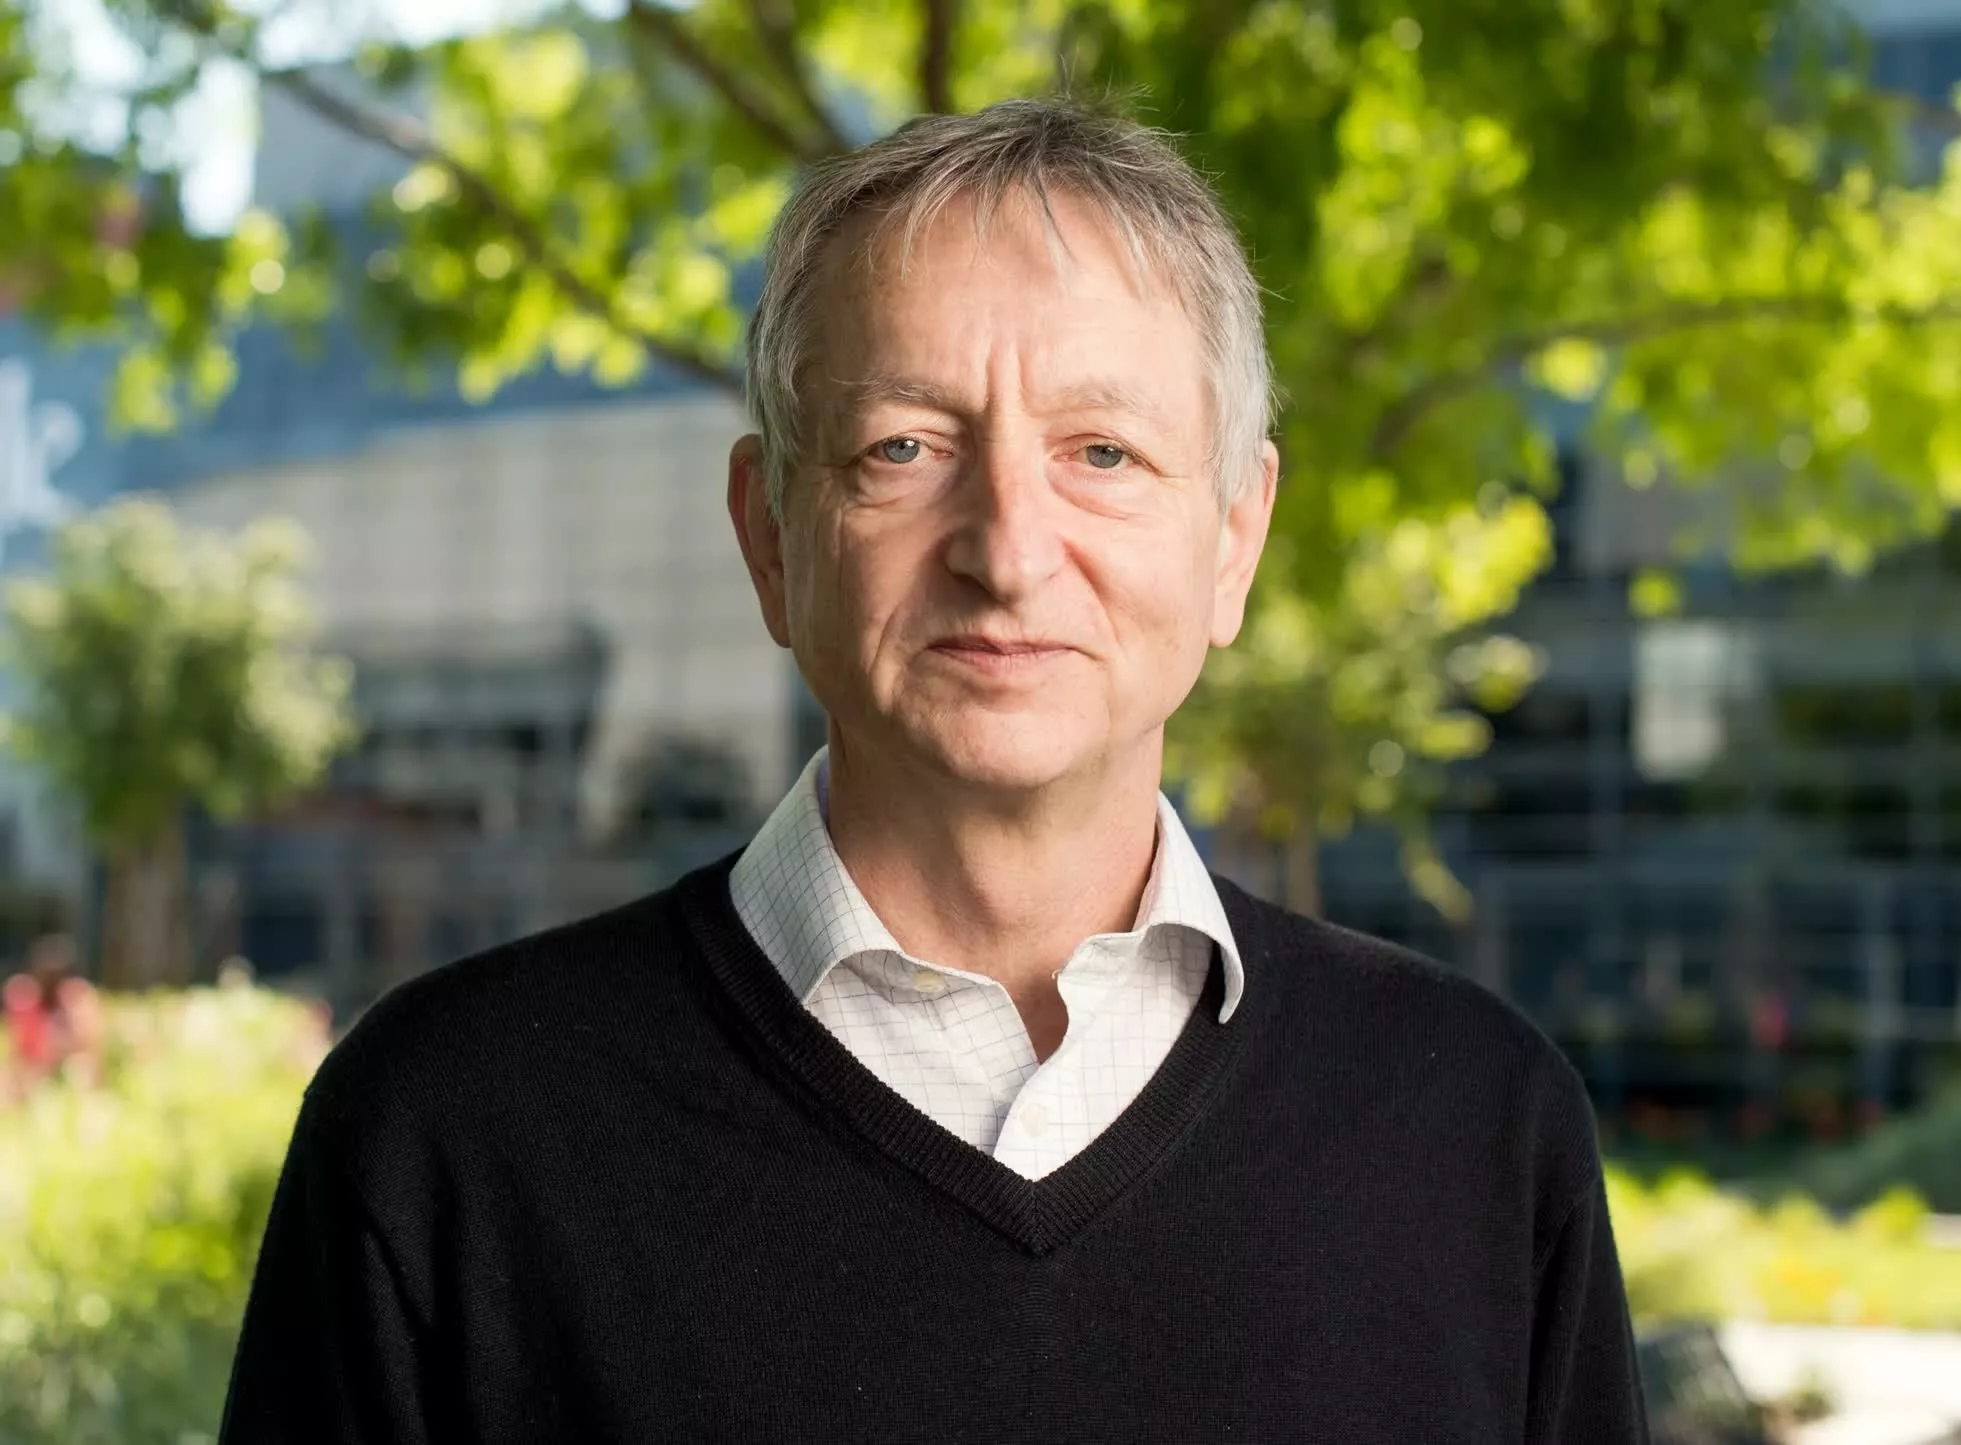 Artificial intelligence pioneer Geoffrey Hinton leaves Google over risks of emerging tech